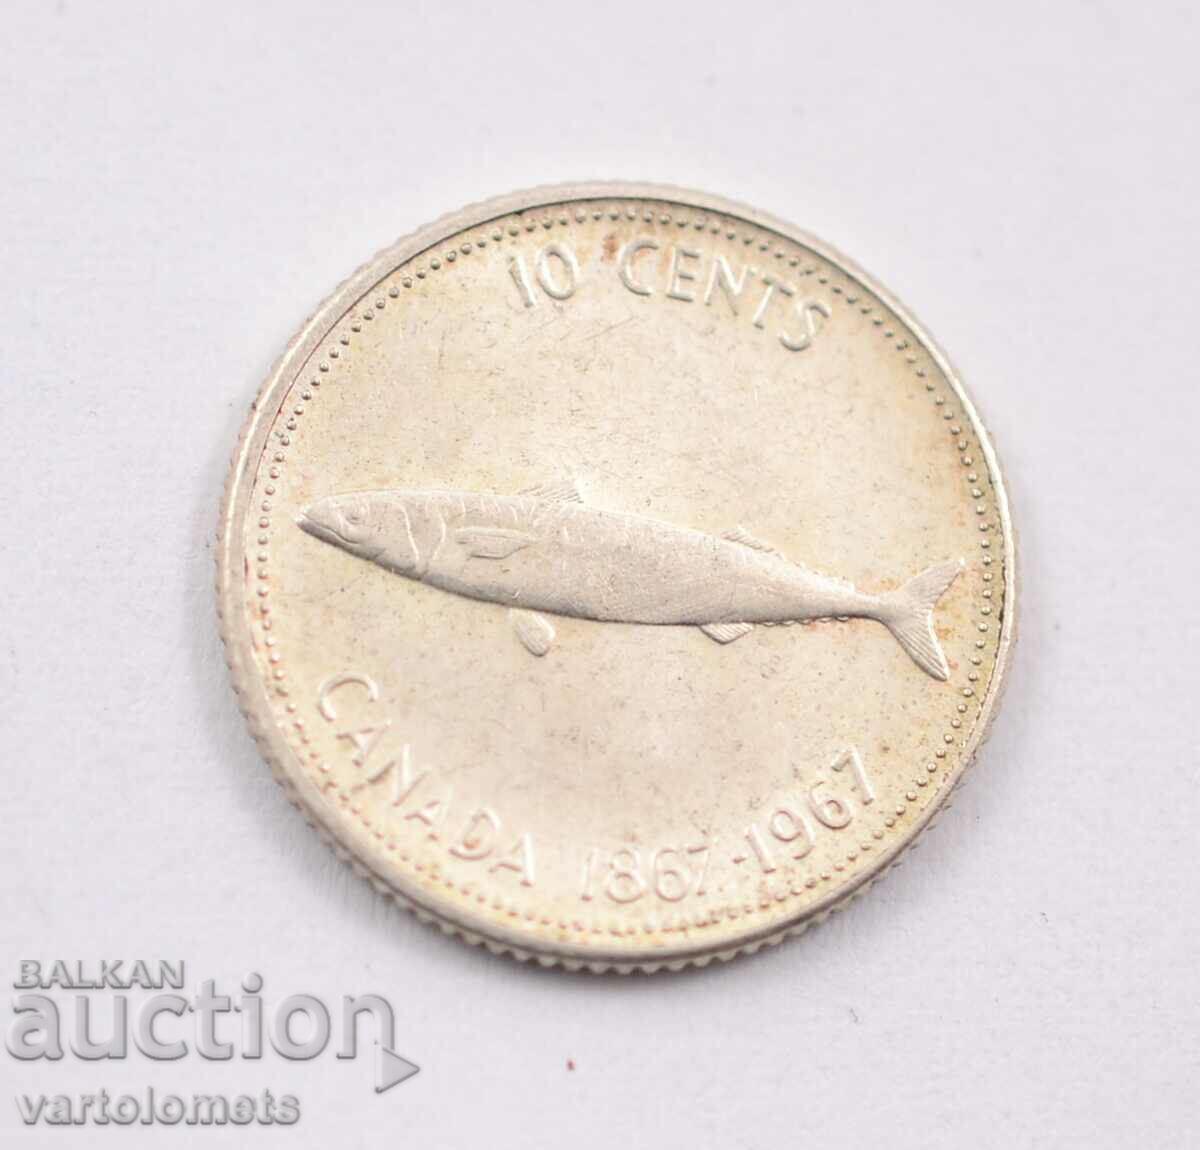 10 cents 1967 - Canada, Silver 0.800, 2.33 g, ø18.3 mm